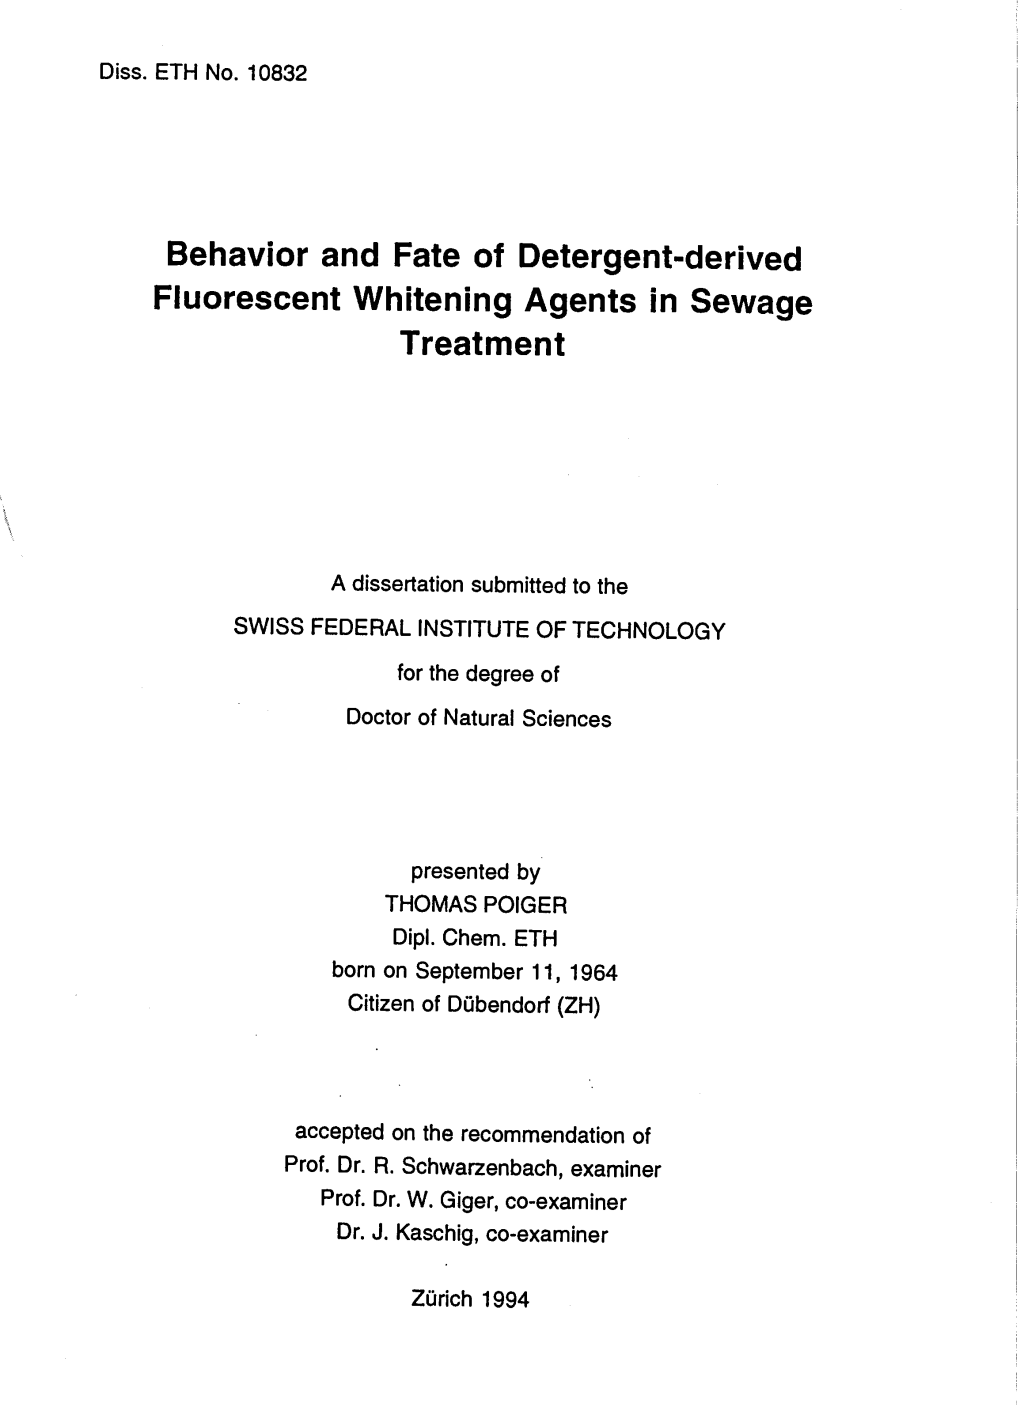 Behavior and Fate of Detergent-Derived Fluorescent Whitening Agents in Sewage Treatment